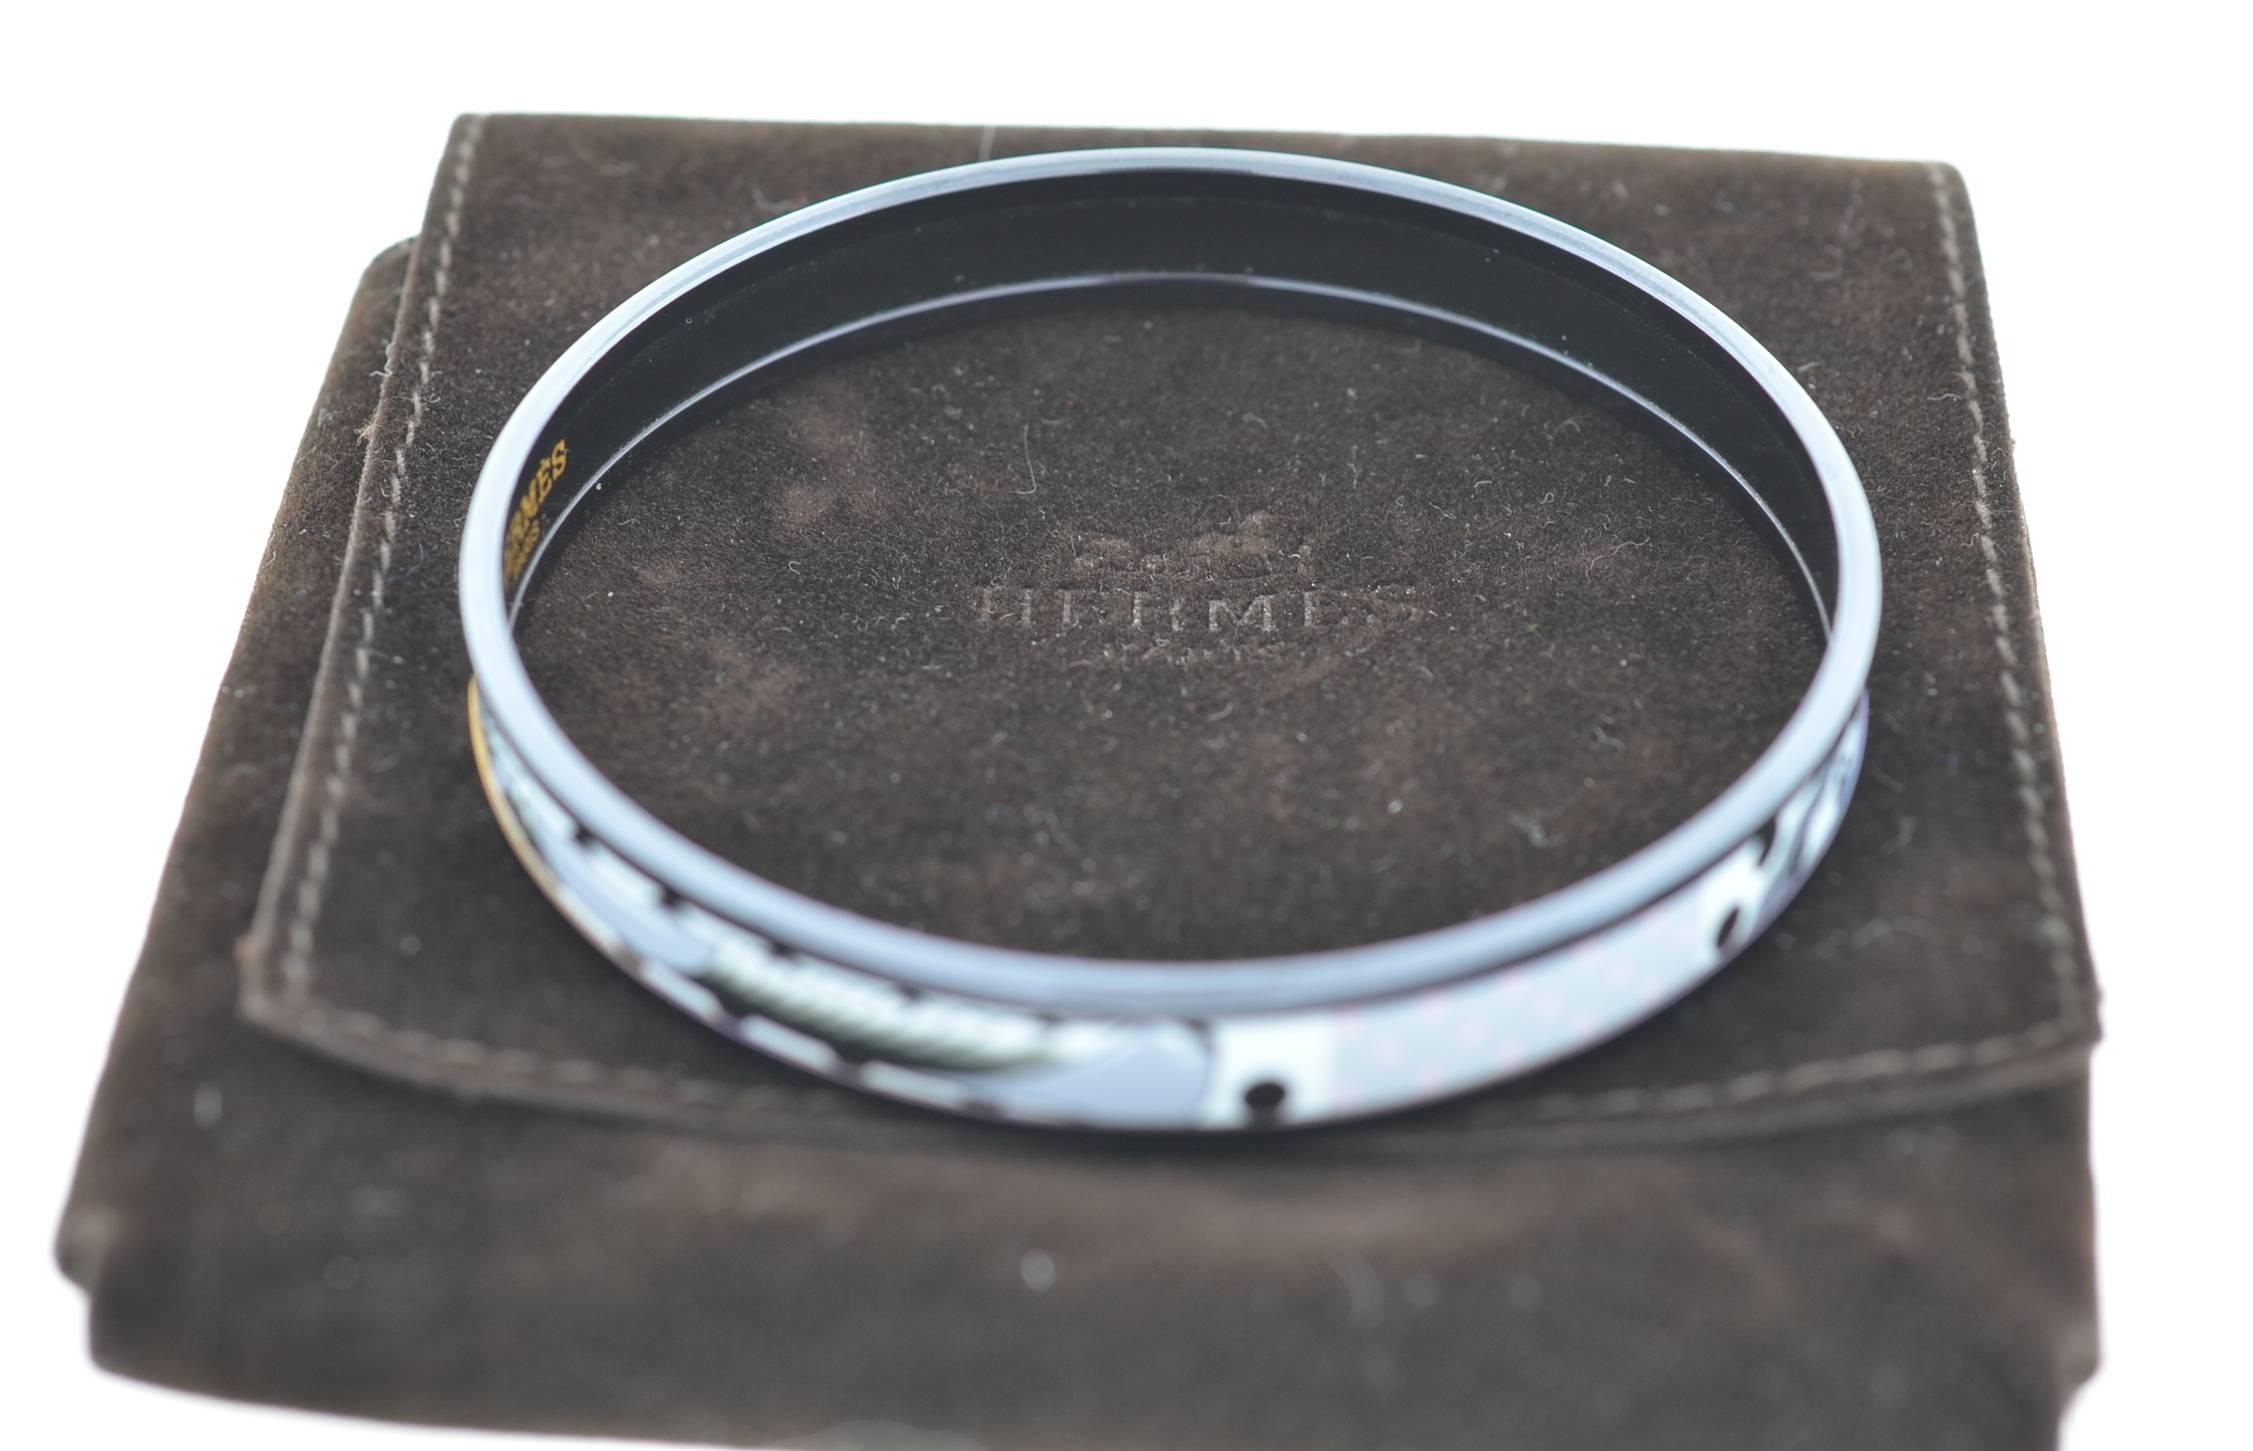 Hermes Thin Black and White Bangle Bracelet with Dustbag 3